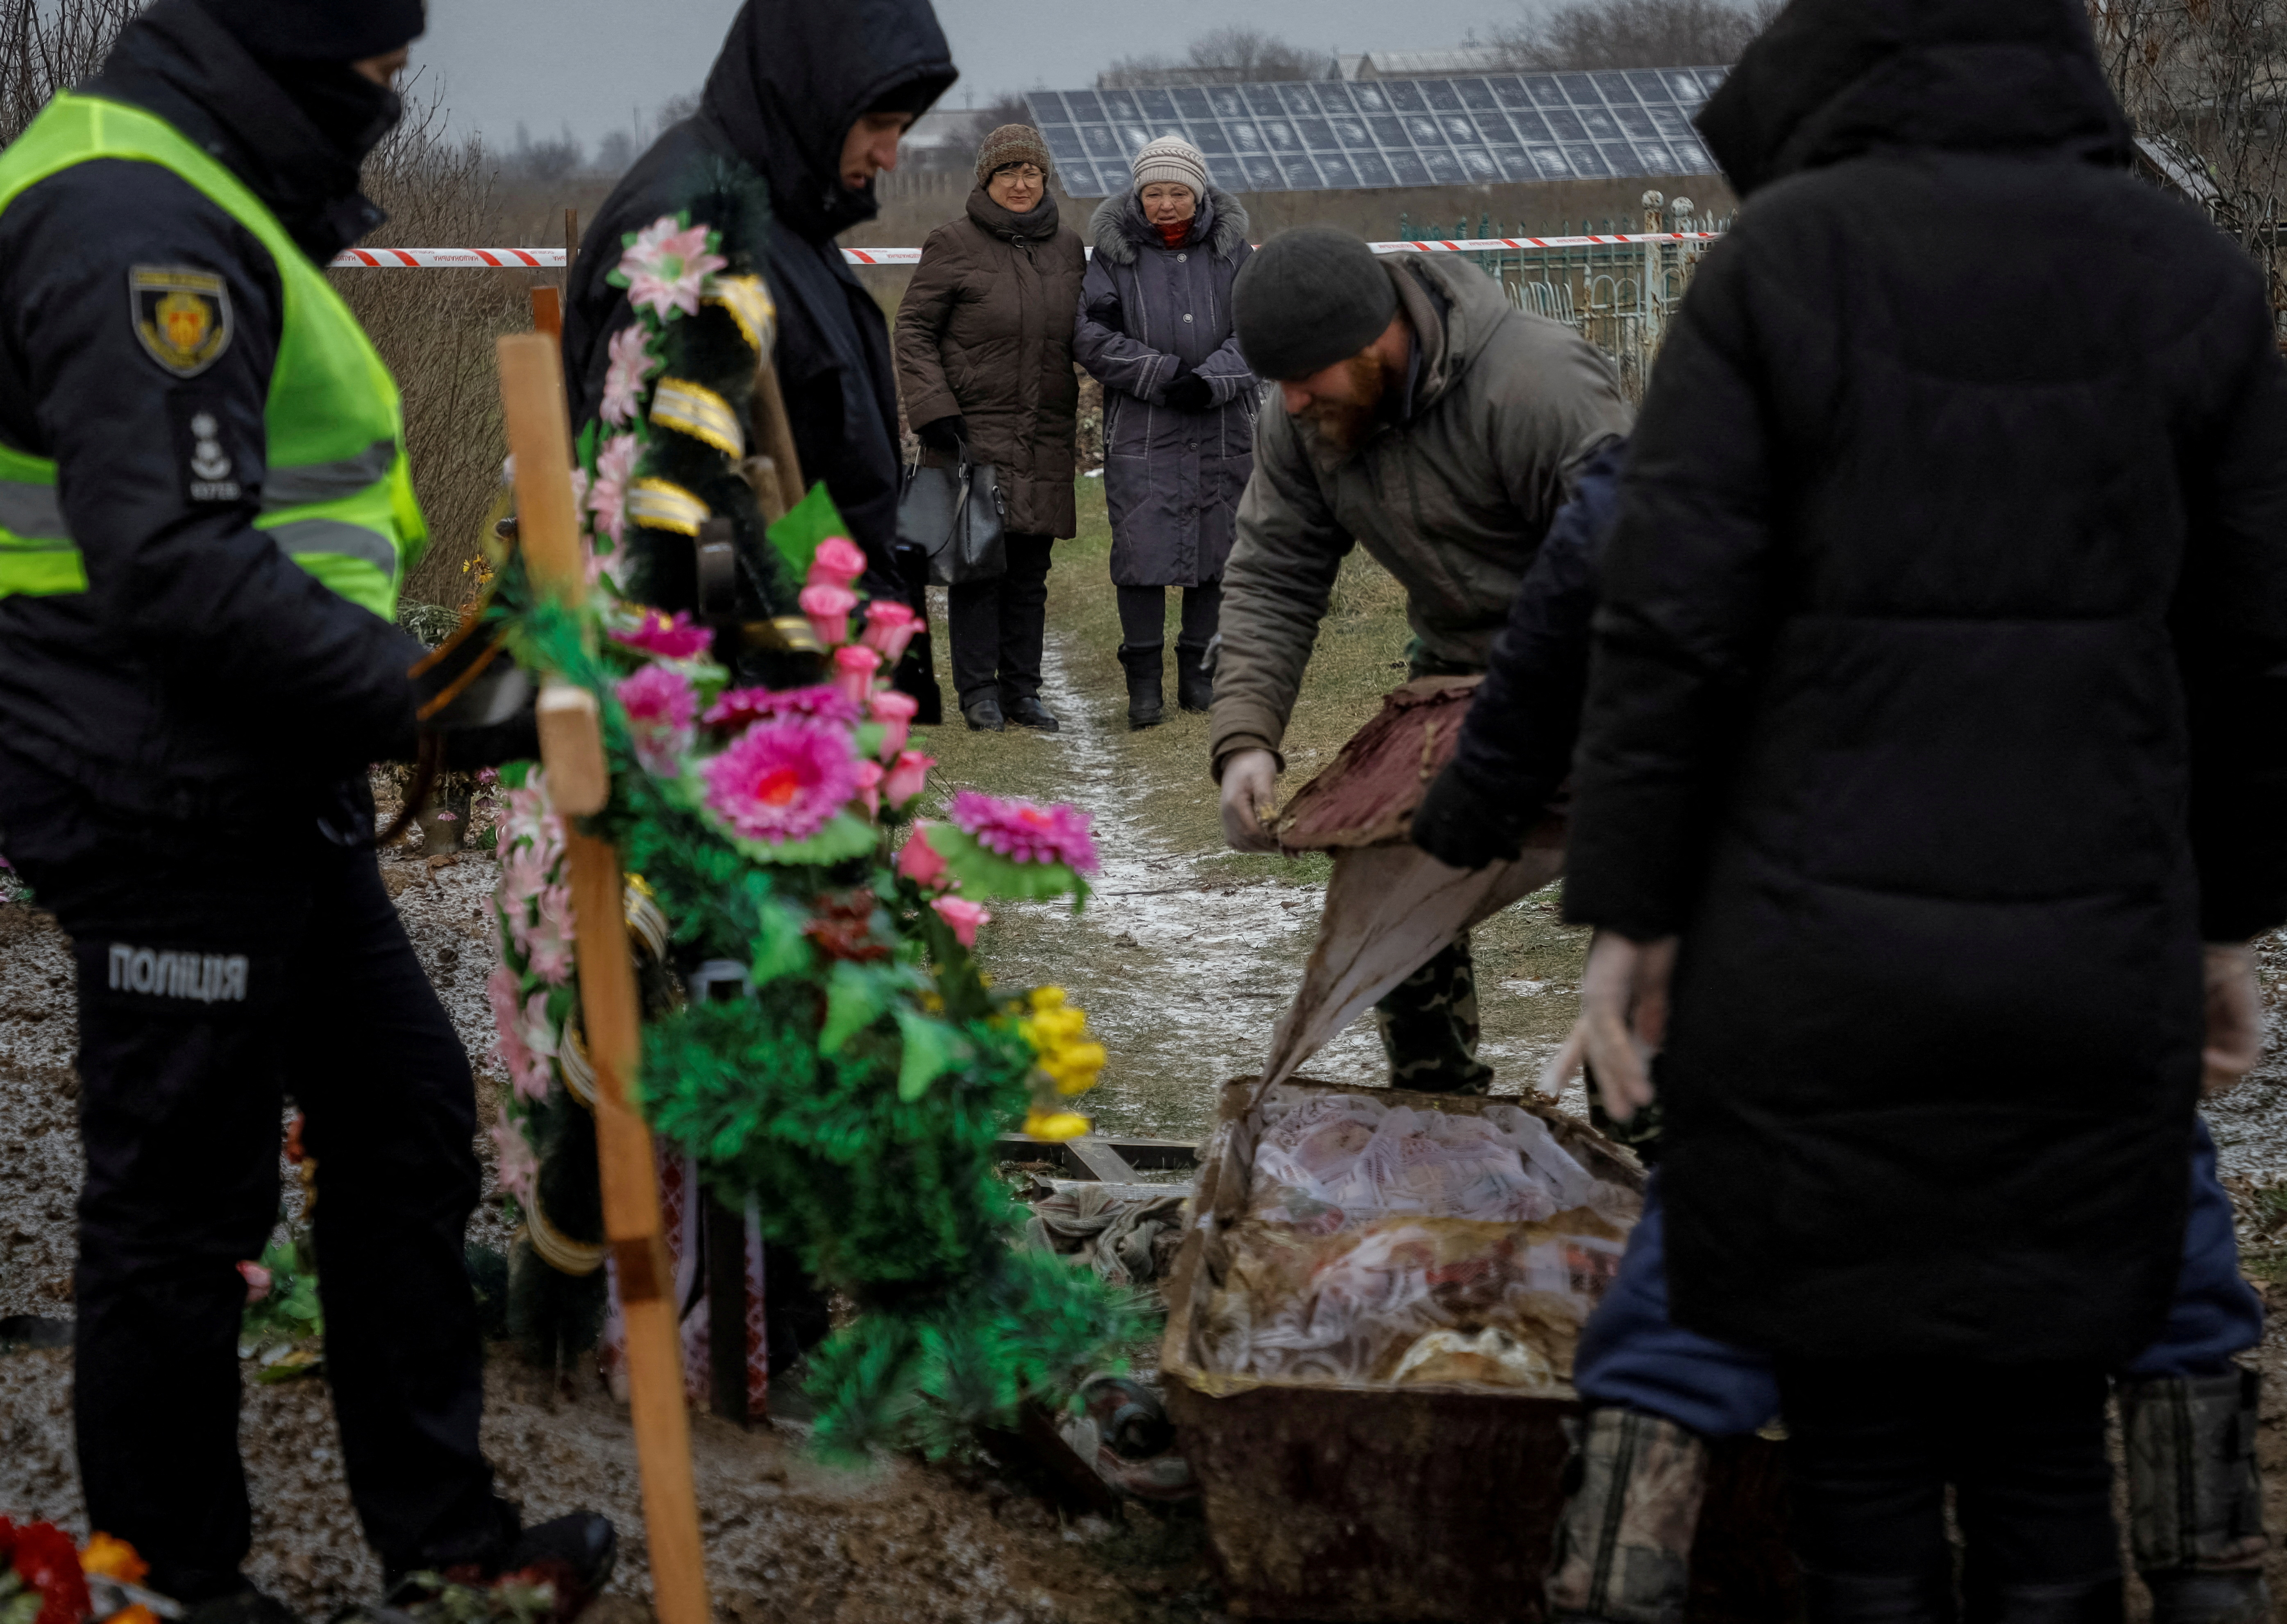 Tamila Pehyda attends an exhumation of her husband Serhii, who was killed by shrapnel during a Russian missiles attack on June 21 in the village of Vysokopillia